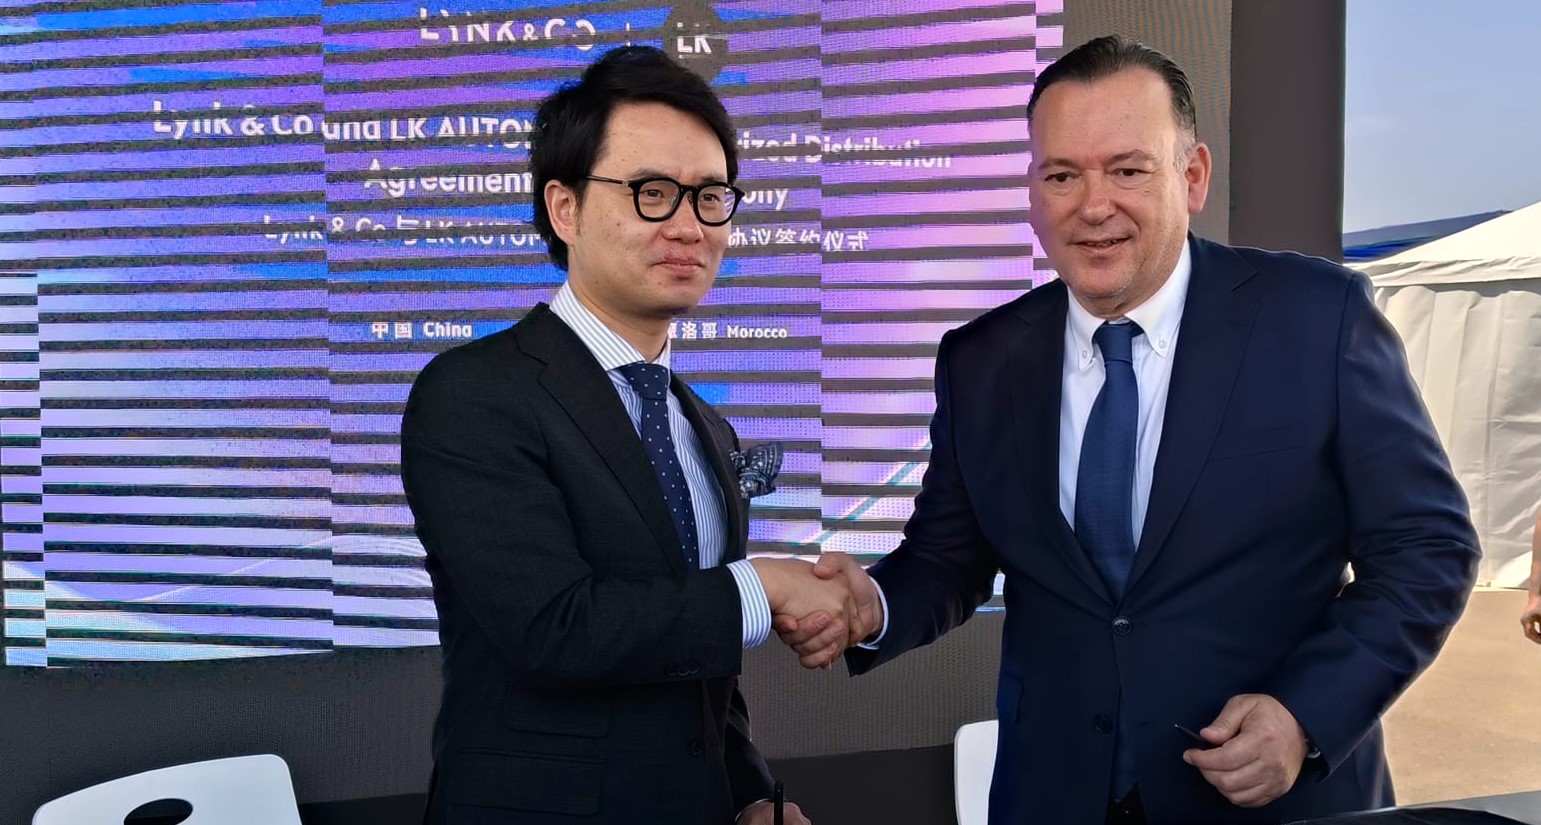 The Chinese car brand Lynk & Co establishes itself in Morocco